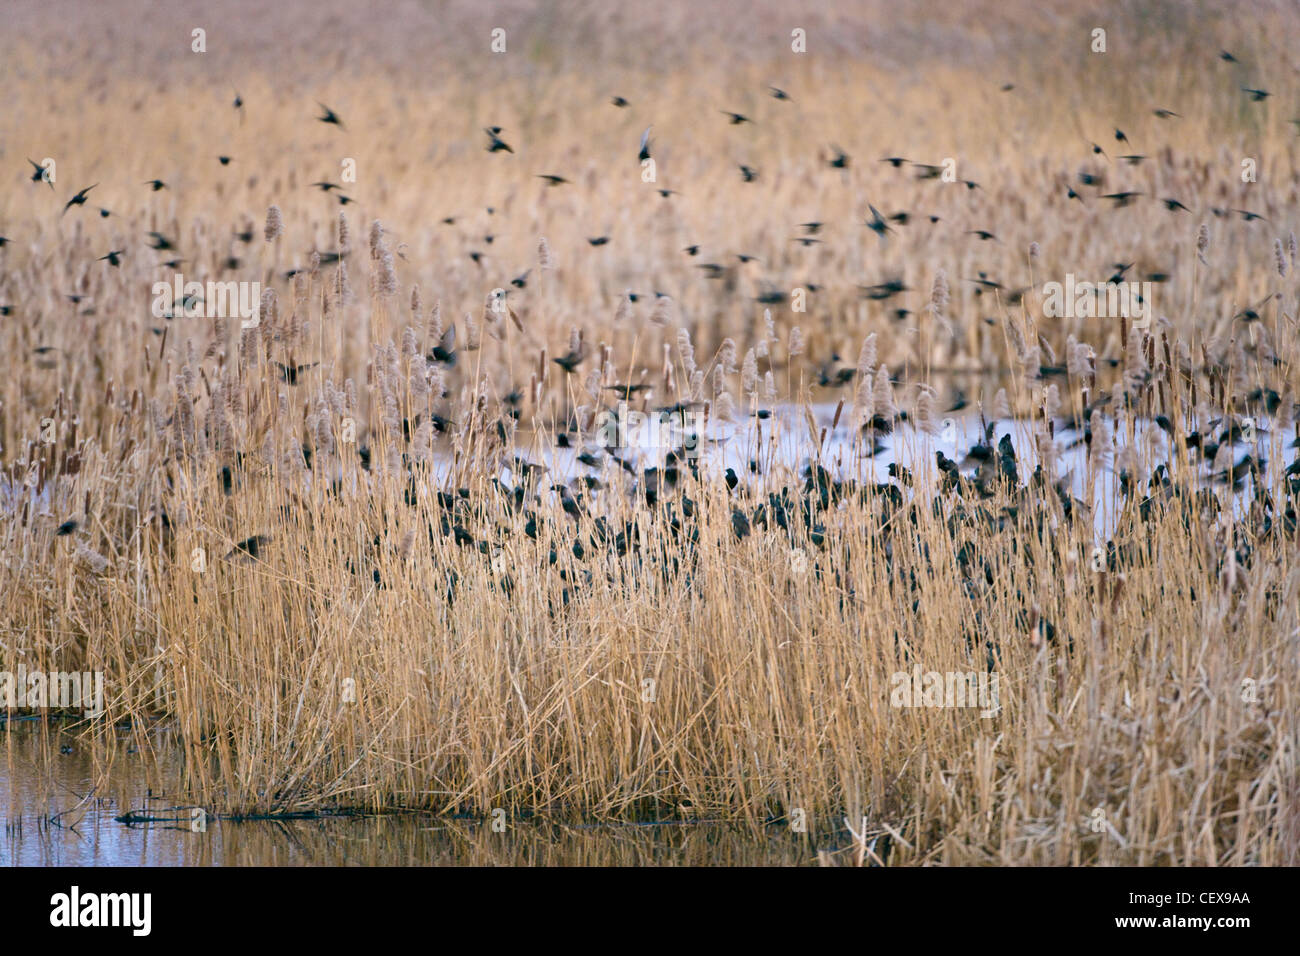 Common Starlings, Sturnus vulgaris, coming into a reed bed at sunset to roost, UK. Stock Photo